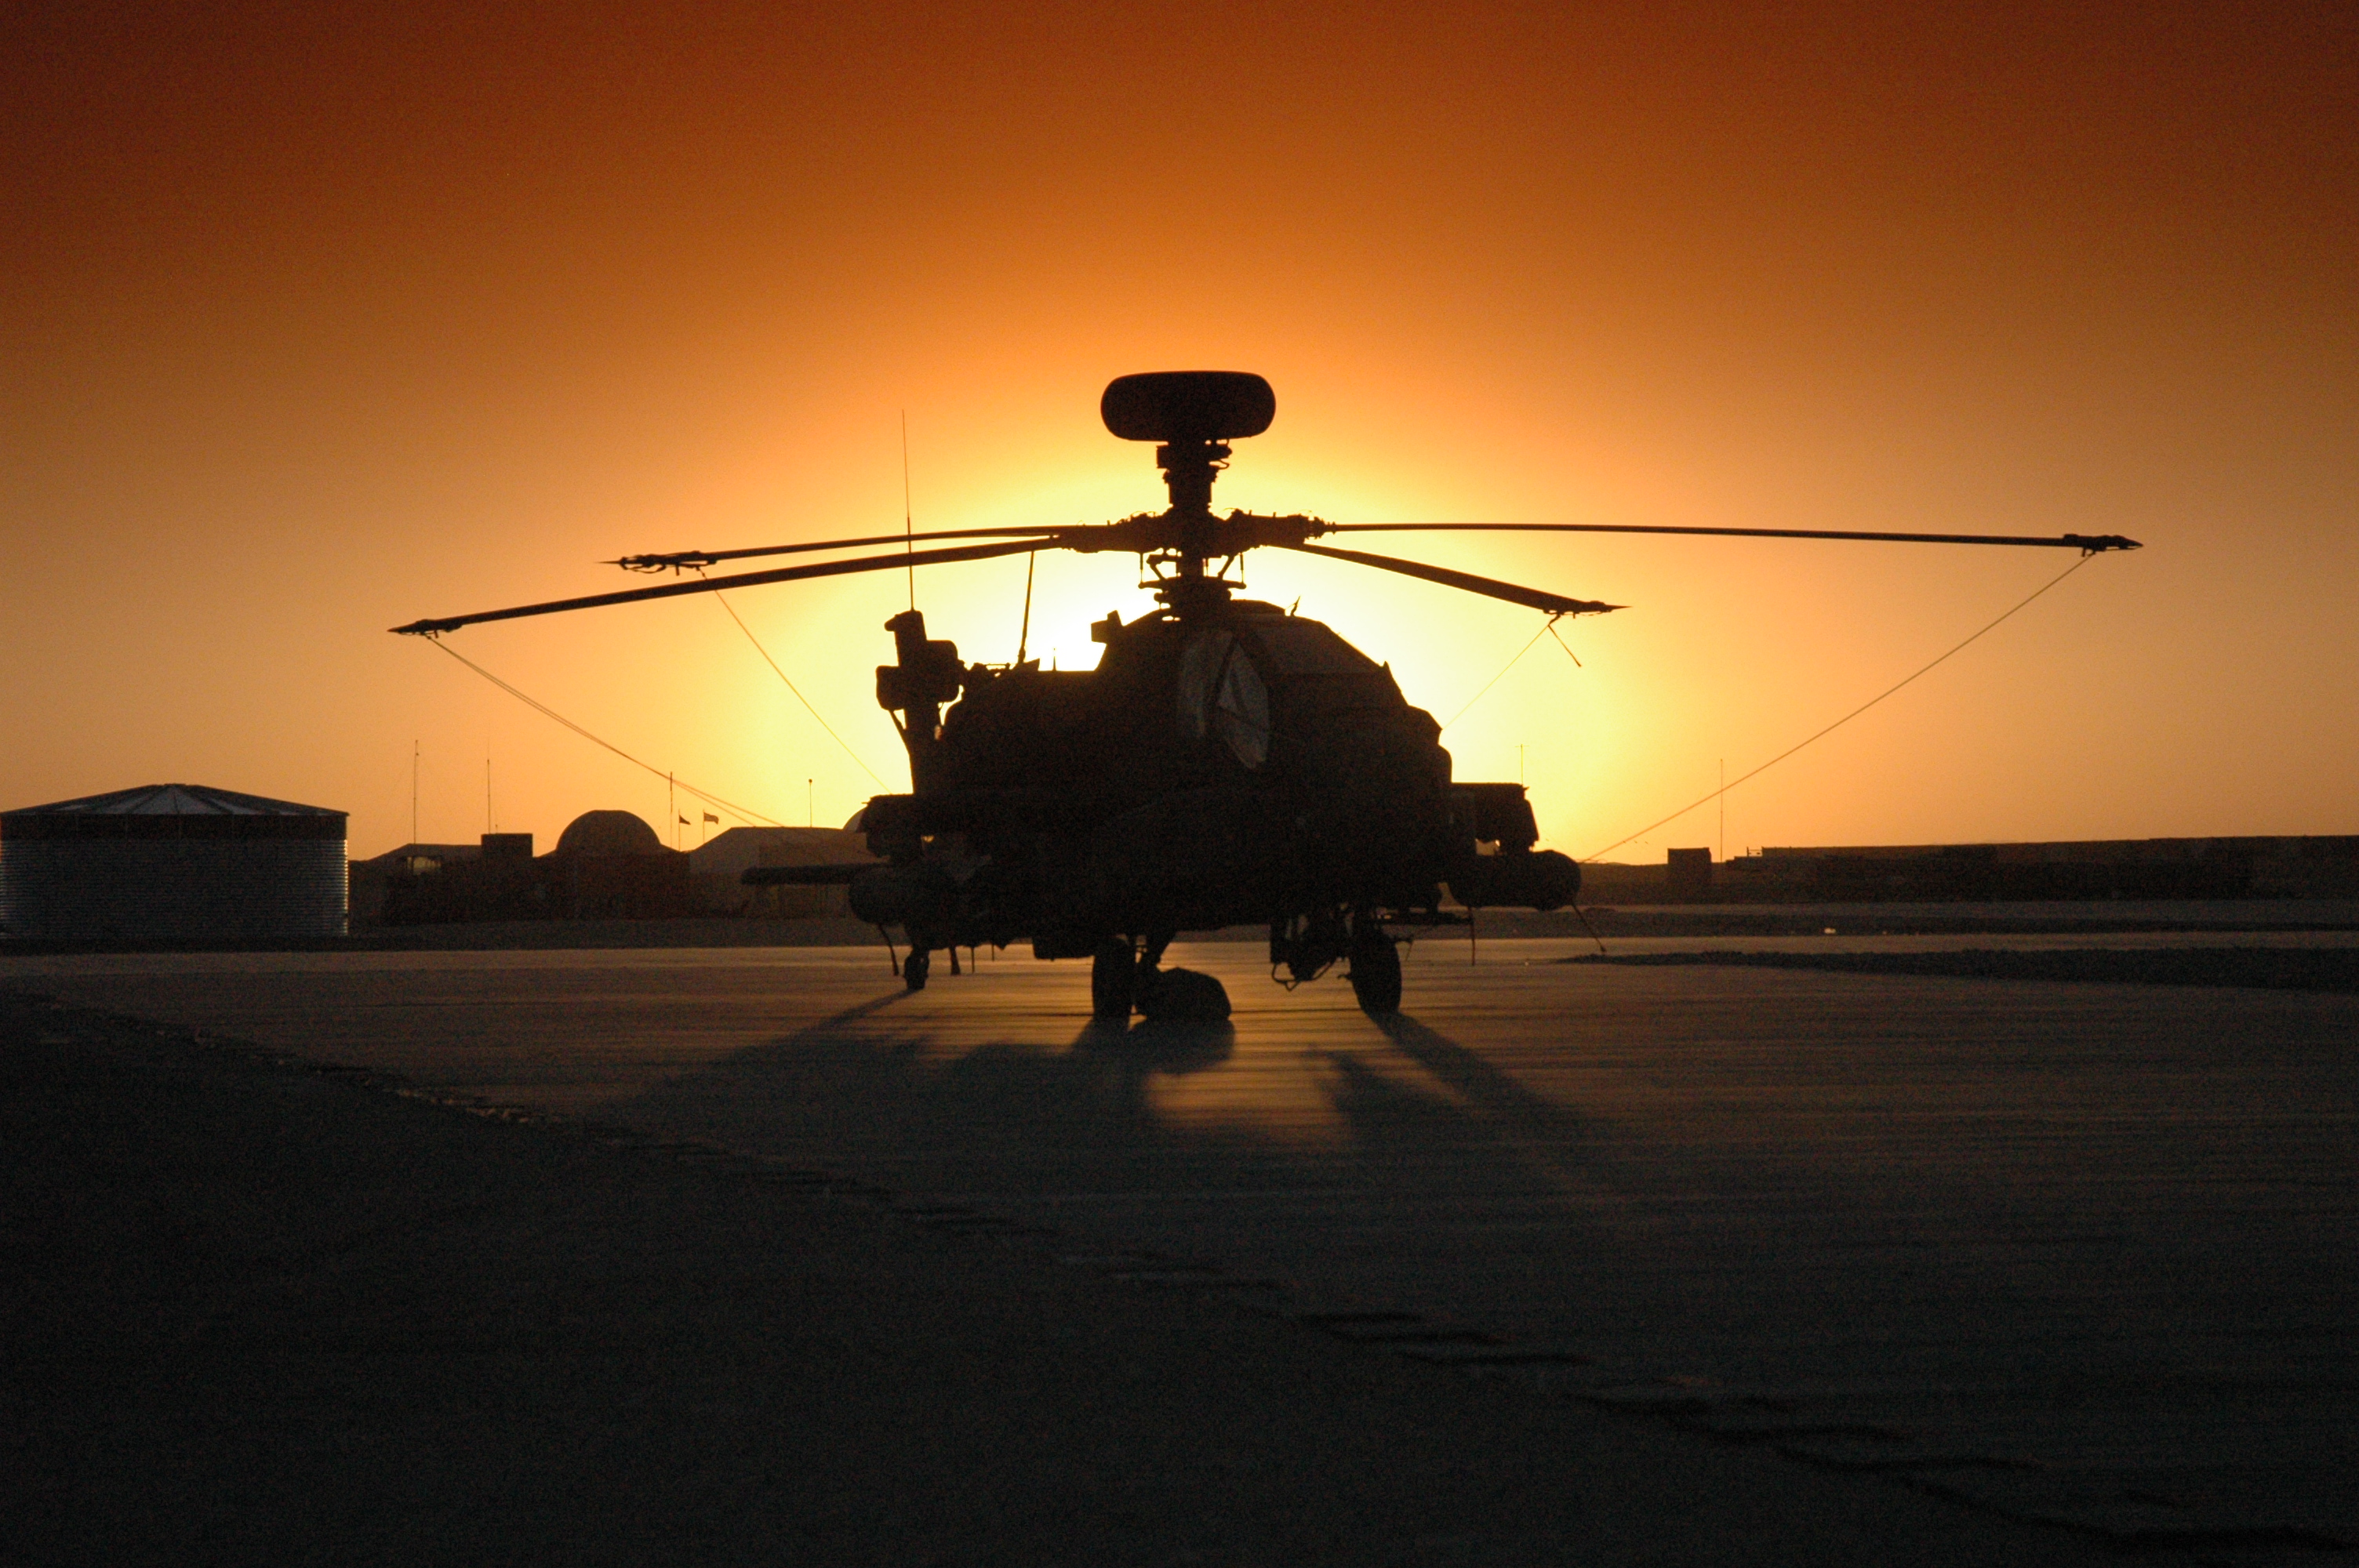 Sunset Aircraft Helicopters Vehicles Ah Apache HD Wallpaper Of